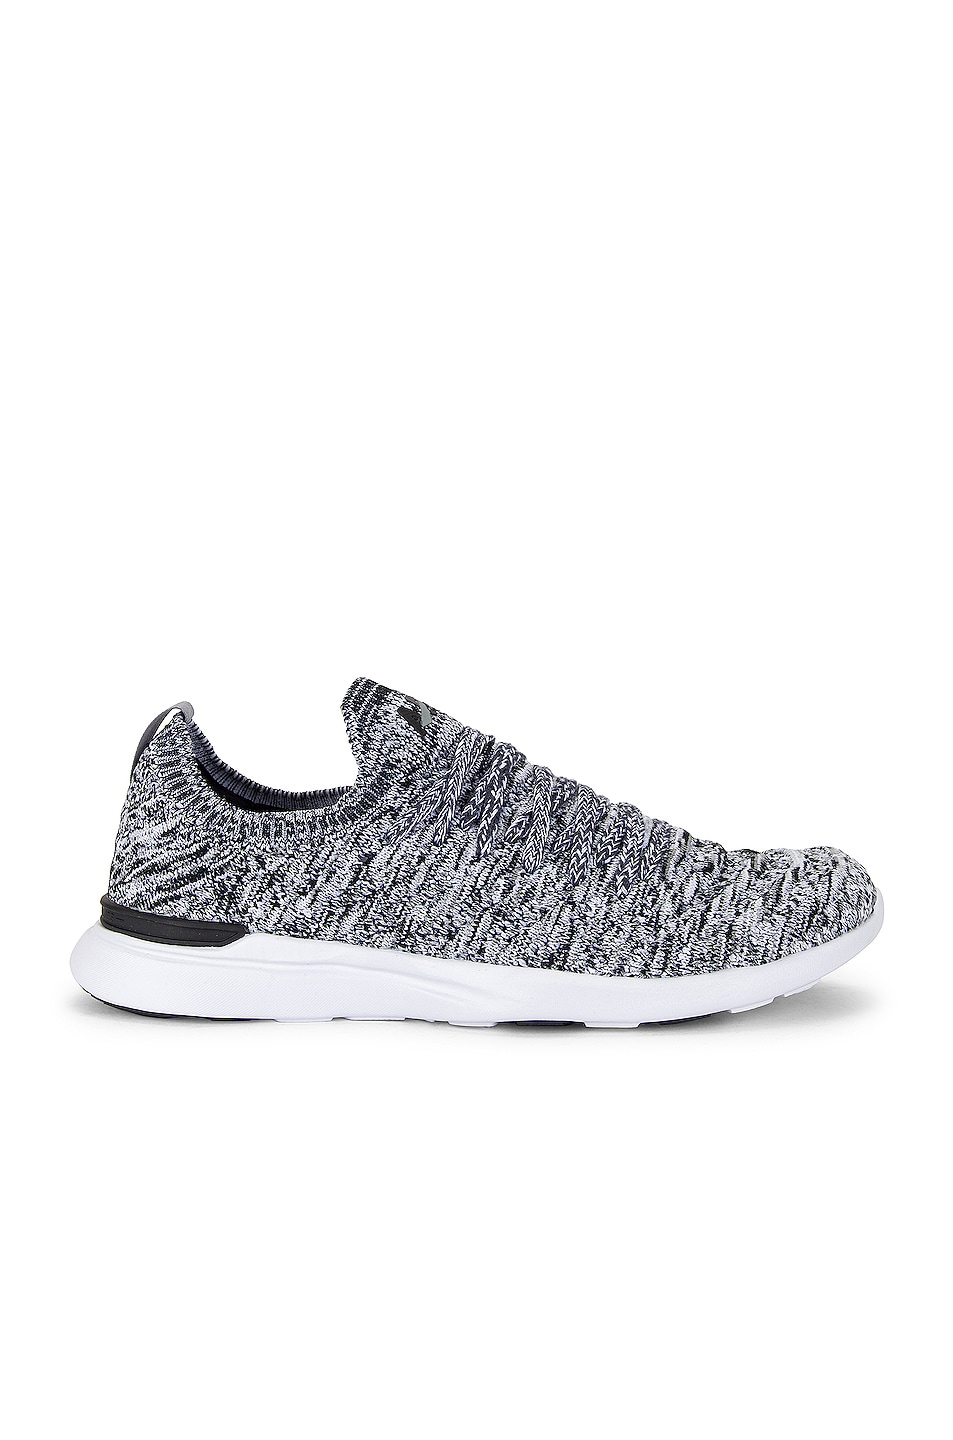 Image 1 of APL: Athletic Propulsion Labs Techloom Wave Sneaker in Heather Grey, Black & White